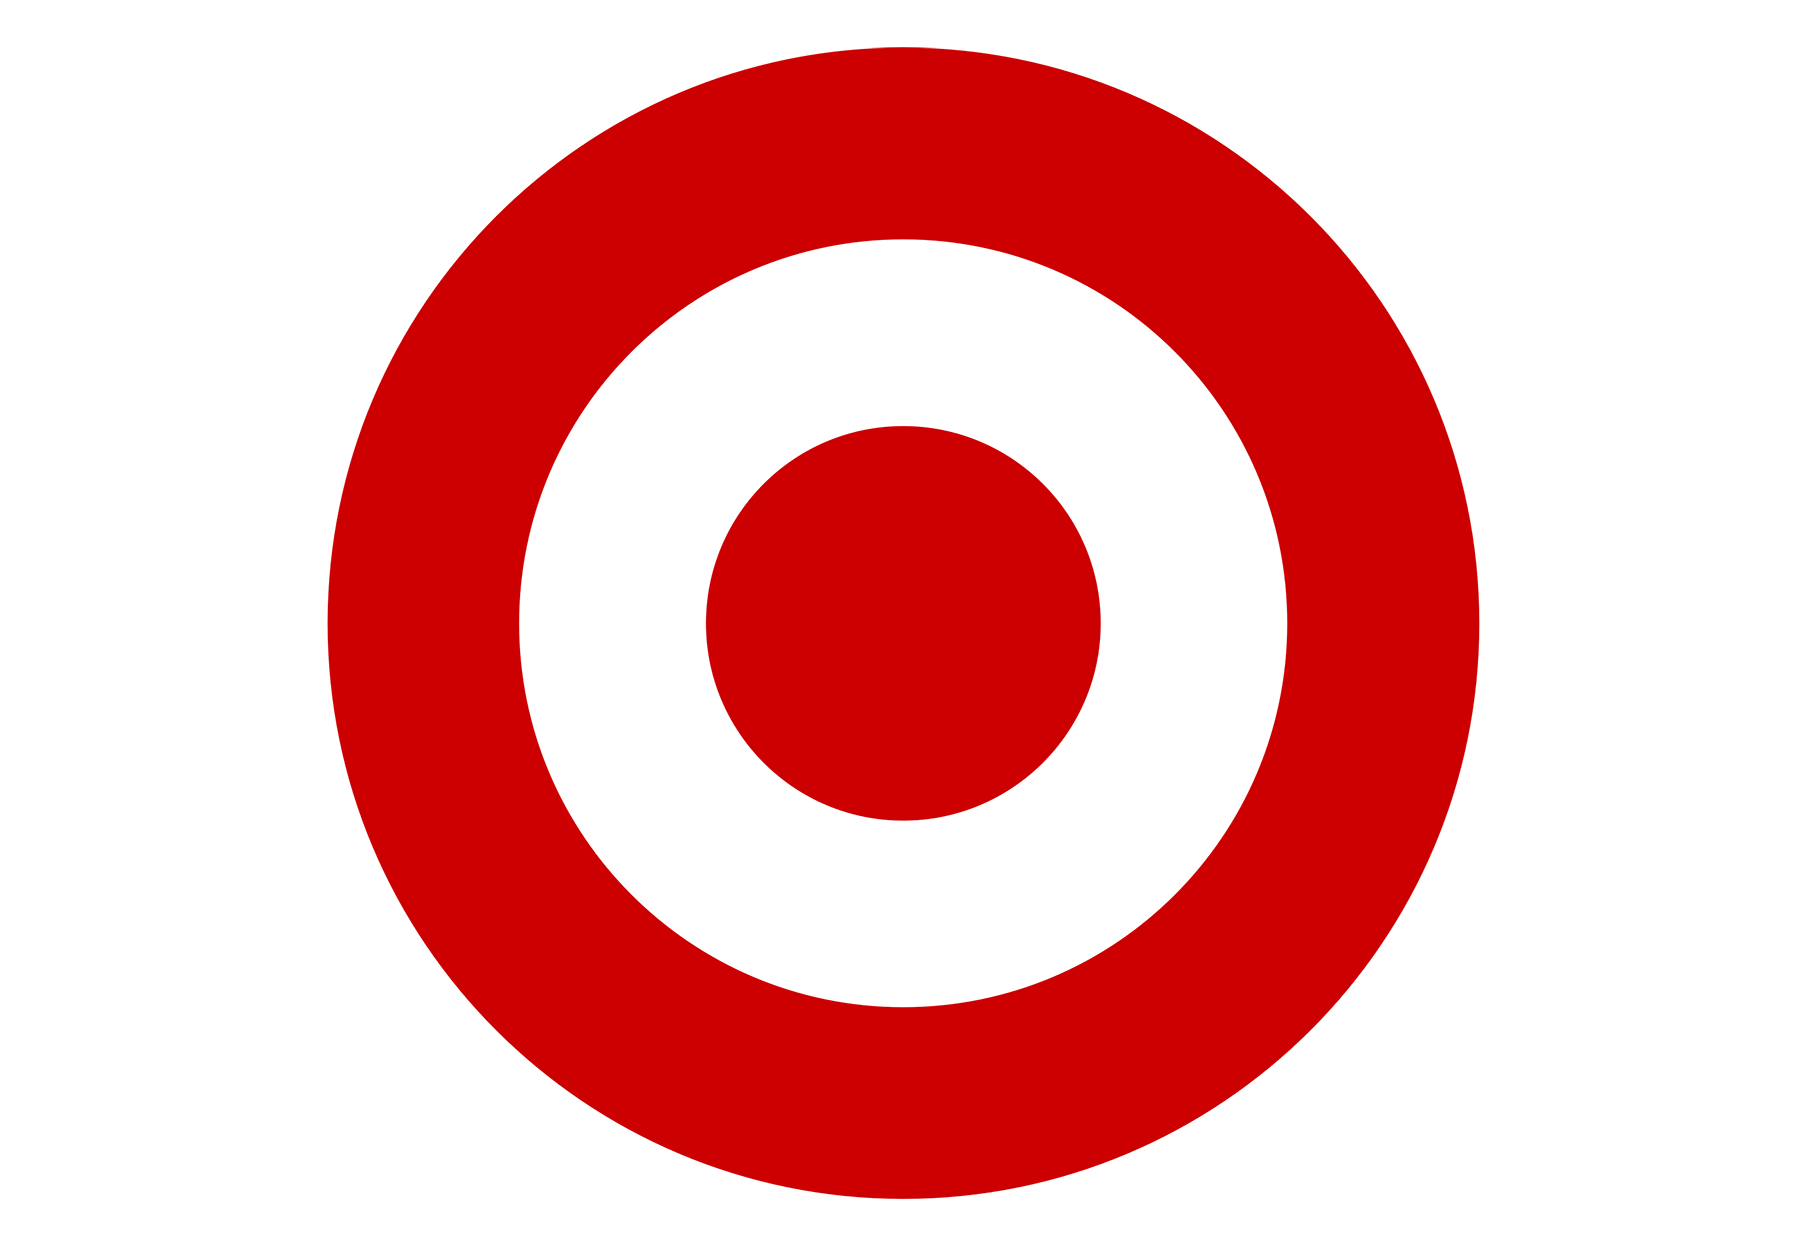 Red and White Circle Logo - Target Logo, Target Symbol, Meaning, History and Evolution